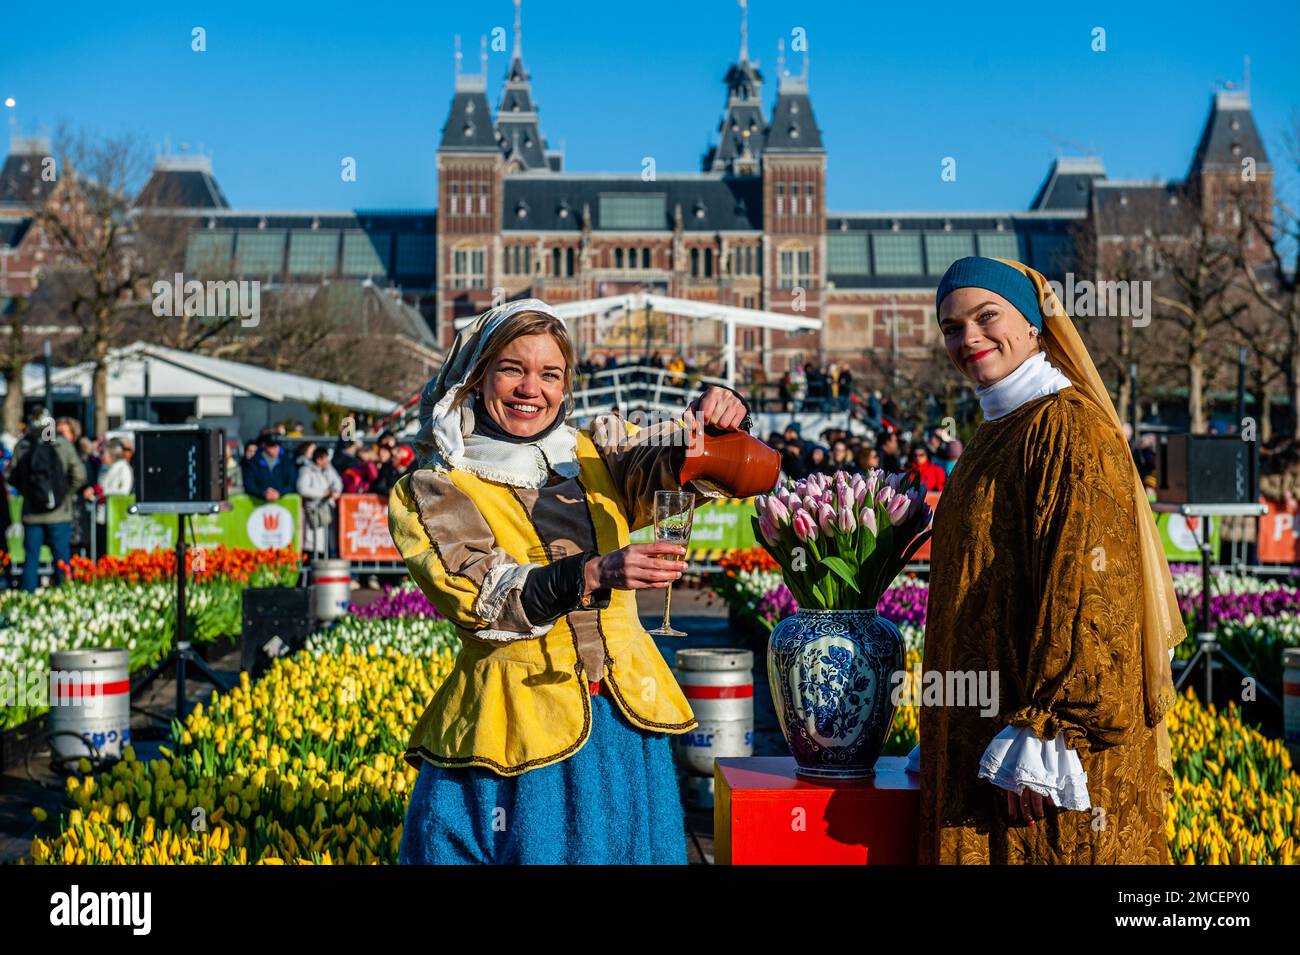 Two women dressing like two characters from the paints of Johannes Vermeer paintings are seen posing for the media. Each year on the 3rd Saturday of January, the National Tulip Day is celebrated in Amsterdam. Dutch tulip growers built a huge picking garden with more than 200,000 colorful tulips at the Museumplein in Amsterdam. Visitors are allowed to pick tulips for free. The event was opened by Olympic skating champion, Irene Schouten. Prior to the opening, she christened a new tulip: Tulipa 'Dutch Pearl' as a reference to the world - famous painting 'The girl with a pearl earring' by Johanne Stock Photo